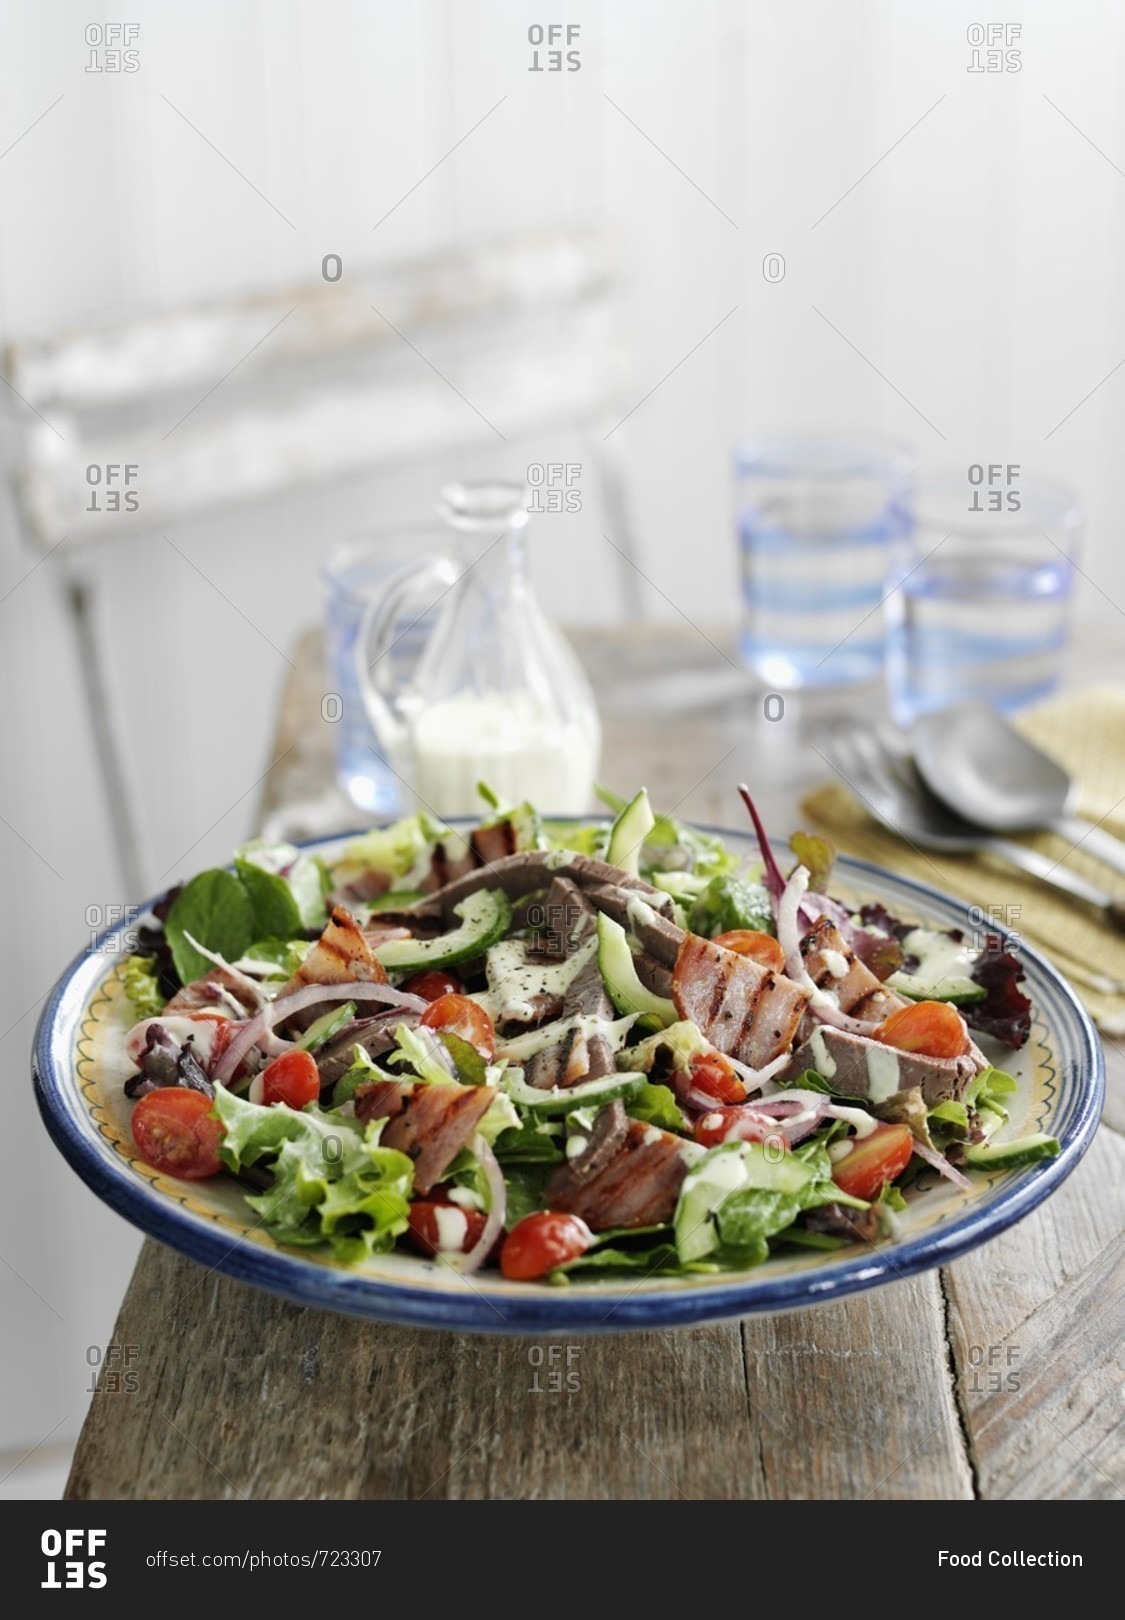 Club salad with beef and grilled bacon (USA)